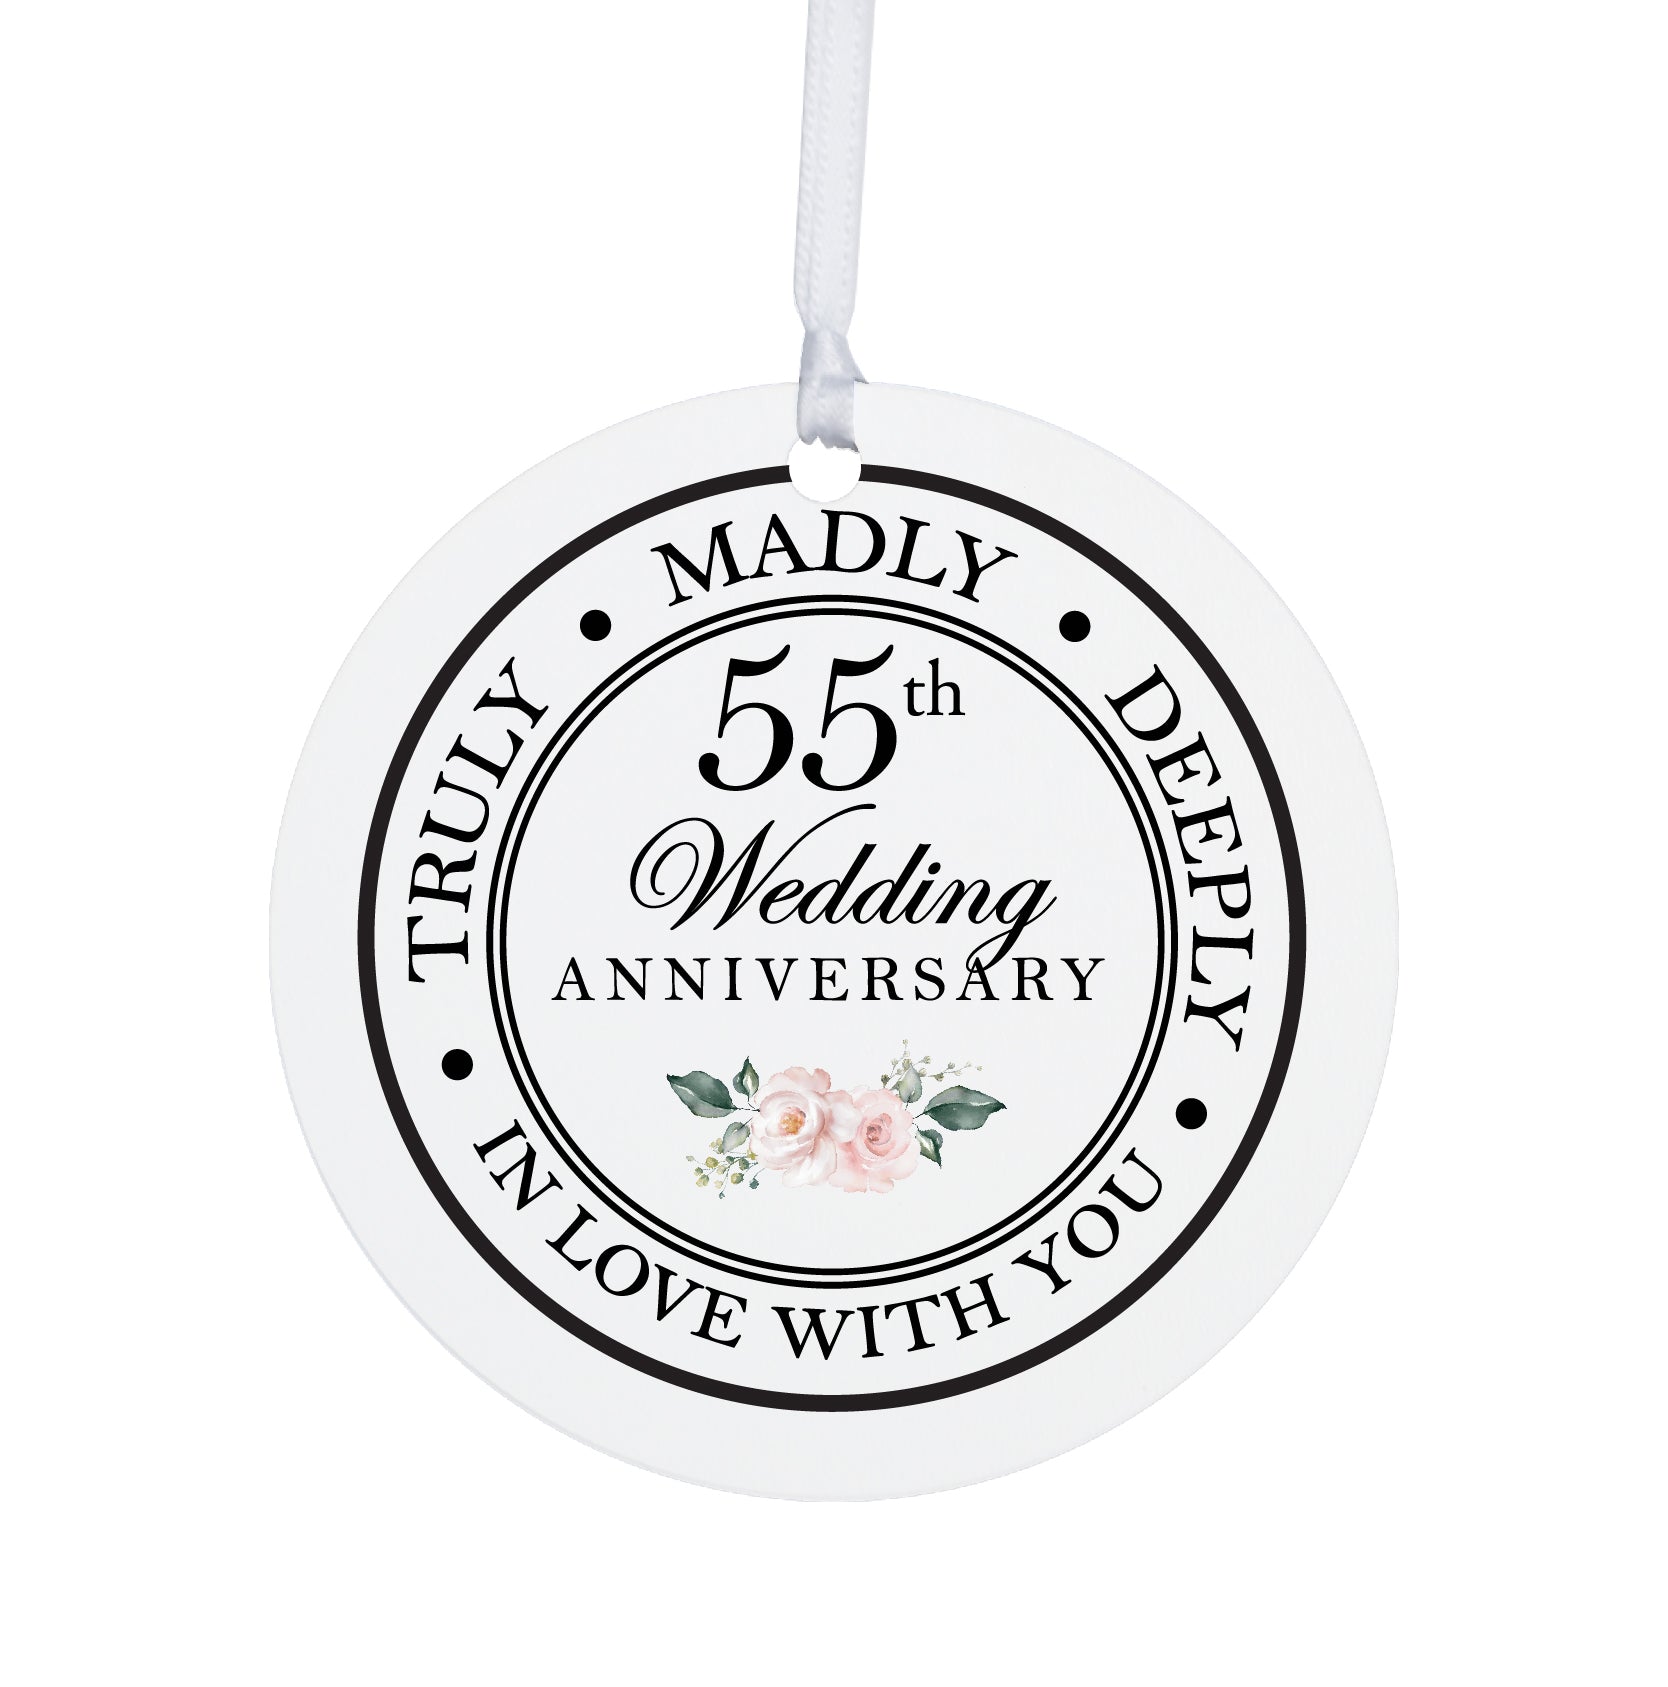 55th Wedding Anniversary White Ornament With Inspirational Message Gift Ideas - Truly, Madly, Deeply In Love With You - LifeSong Milestones